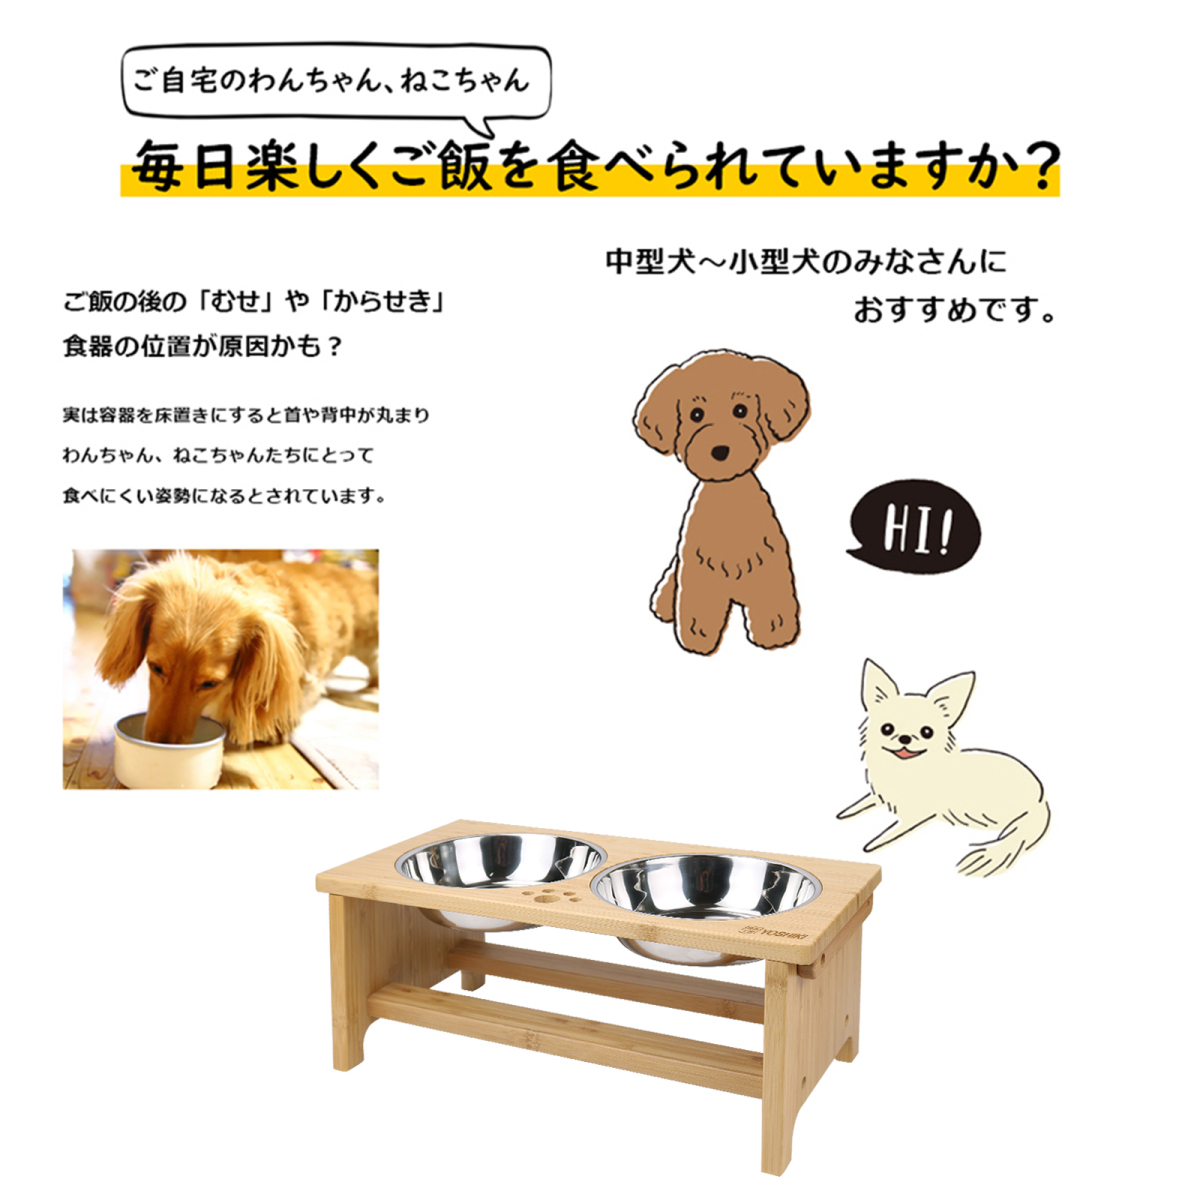  pet table for bowls tableware tableware stand dog cat height food bowls M size medium sized dog hood stand bamboo made good tree atelier YOSHIKI YK-PFM